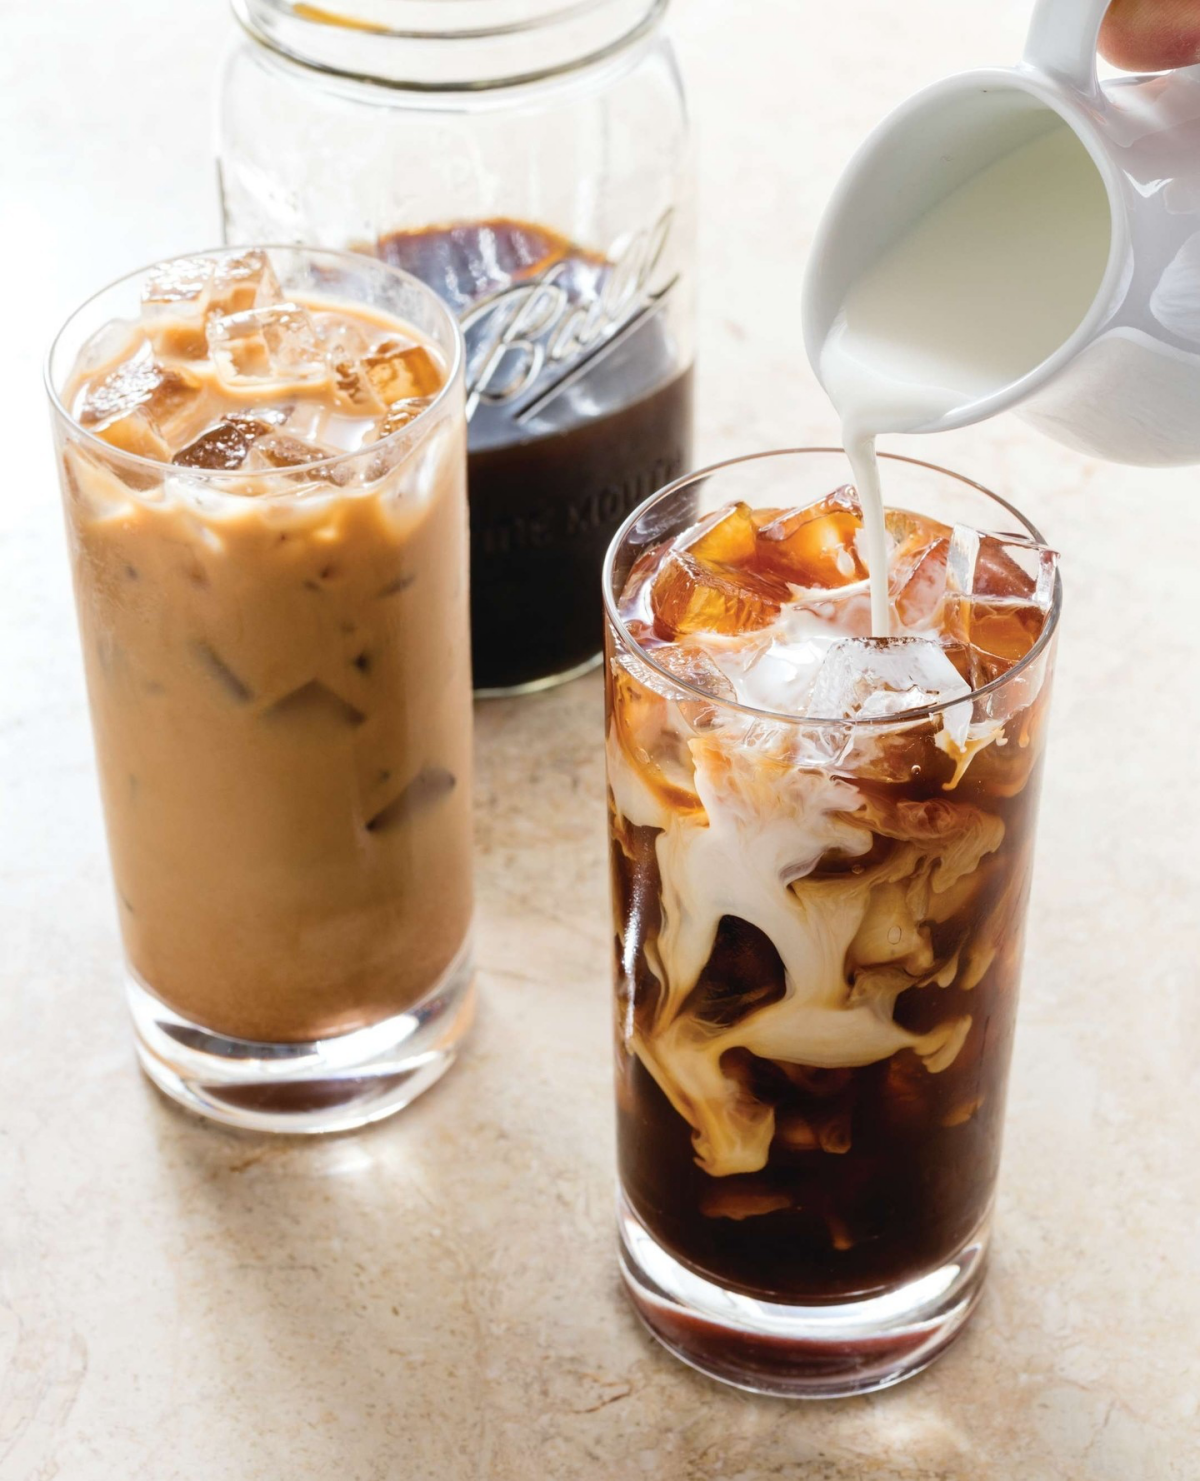 Cold Brew Vs Iced Coffee: Differences, Similarities, And More